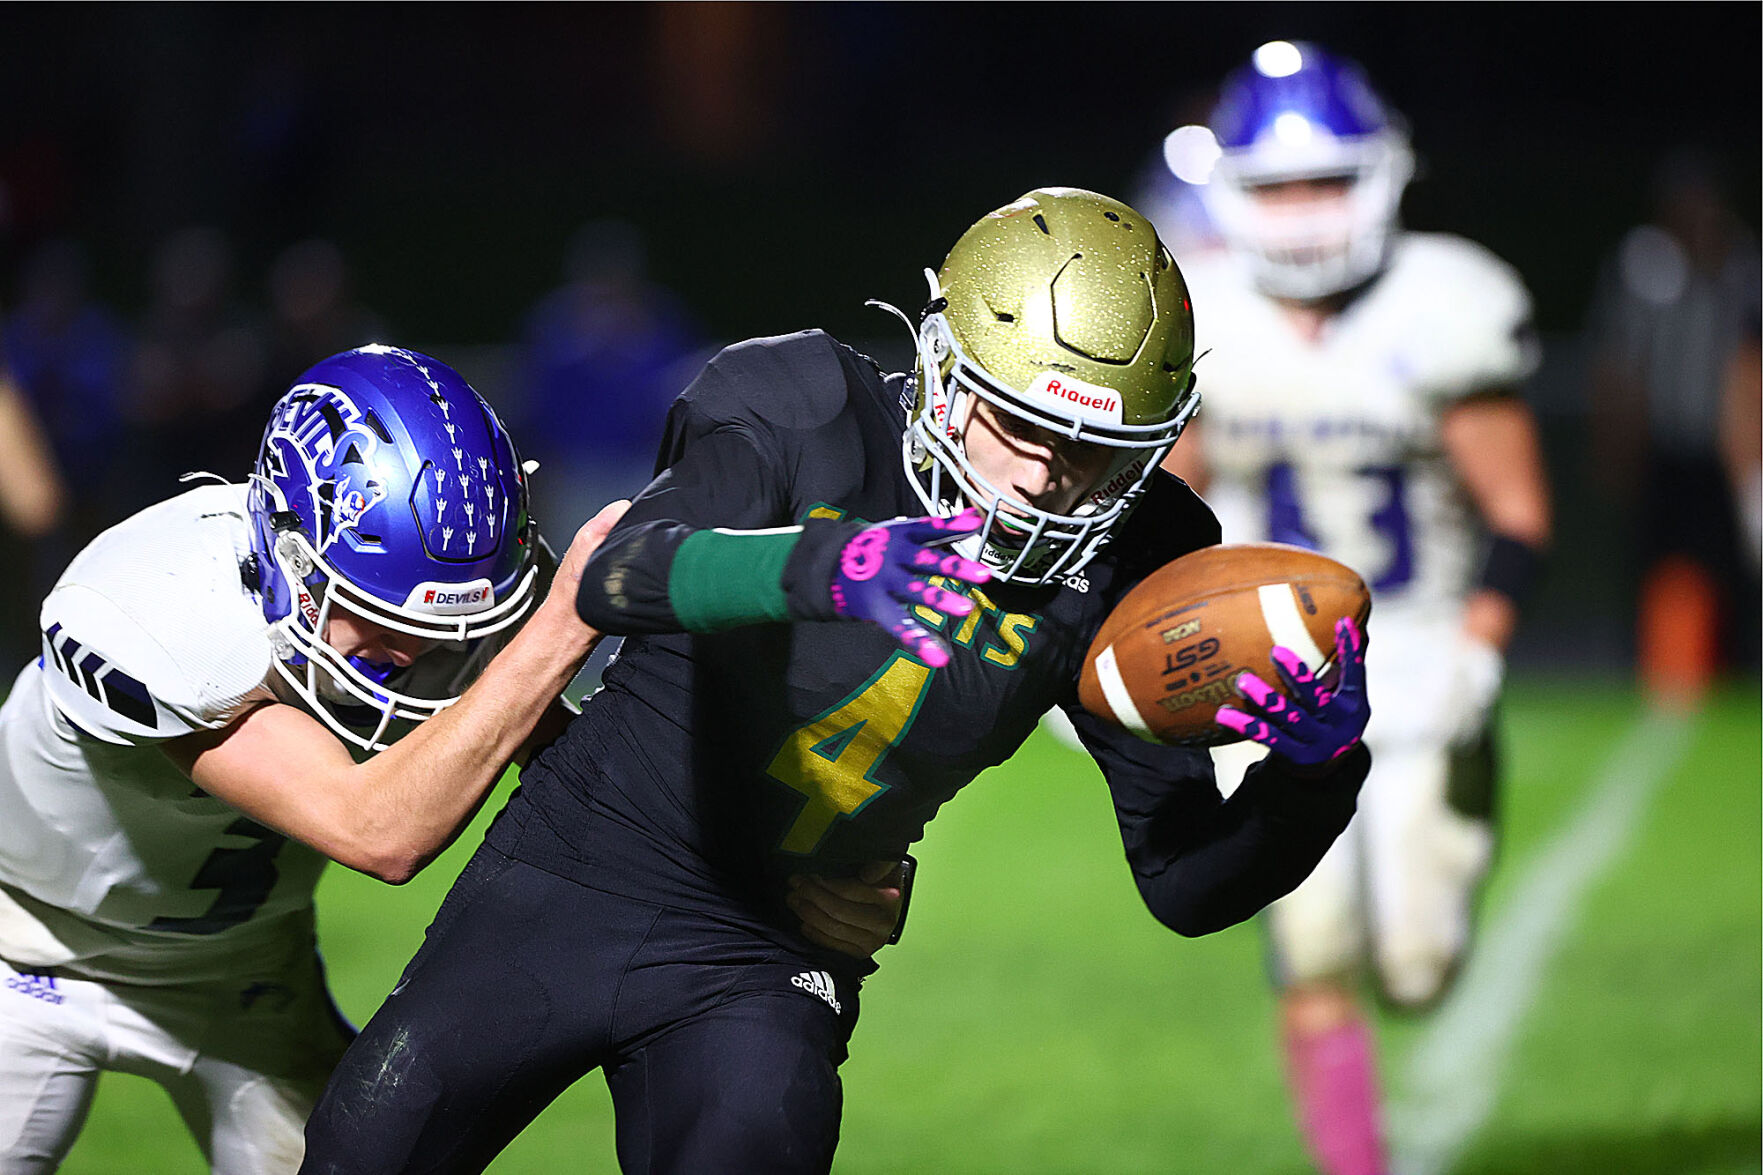 Eastern’s football team faces No. 8 Bluffton in Class 2A Sectional 36 final: Matchup and key players